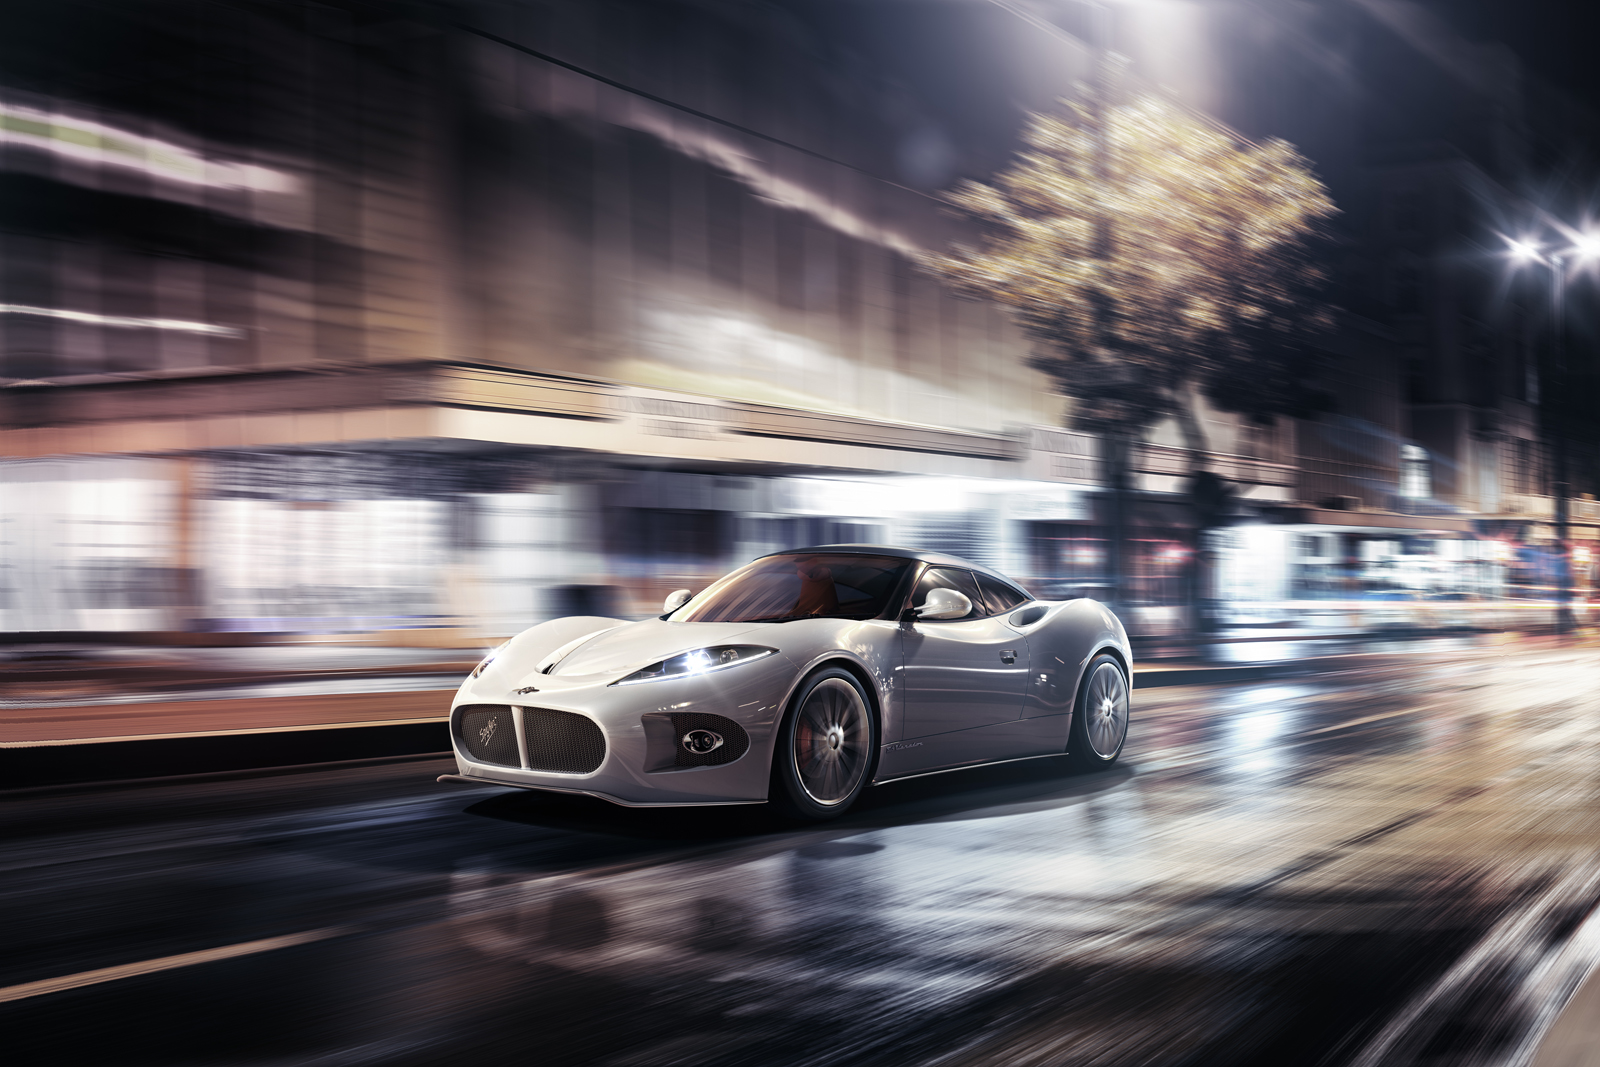 Spyker B6 Venator Spyder Concept will have its debut on Pebble Beach